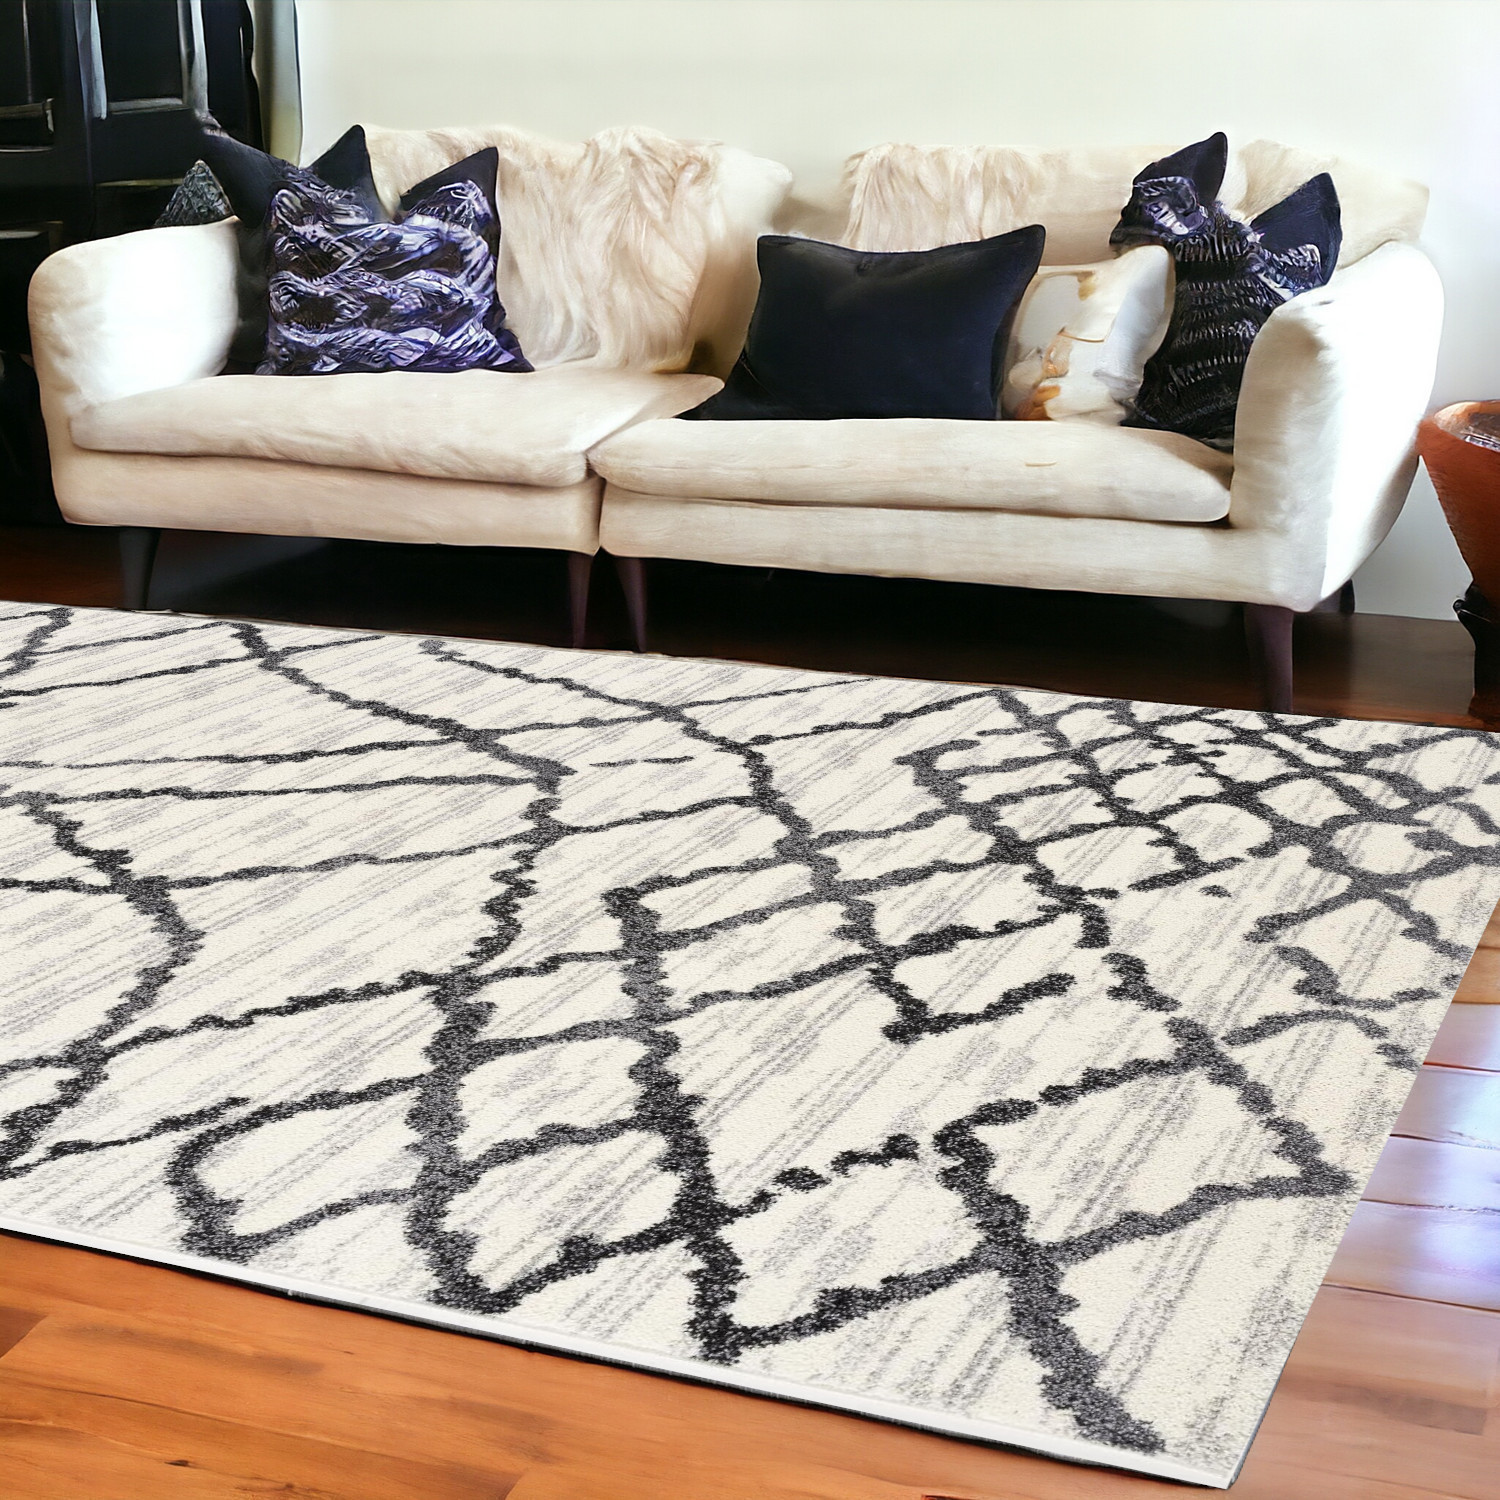 7’ X 9’ Gray And Black Modern Abstract Area Rug-390301-1